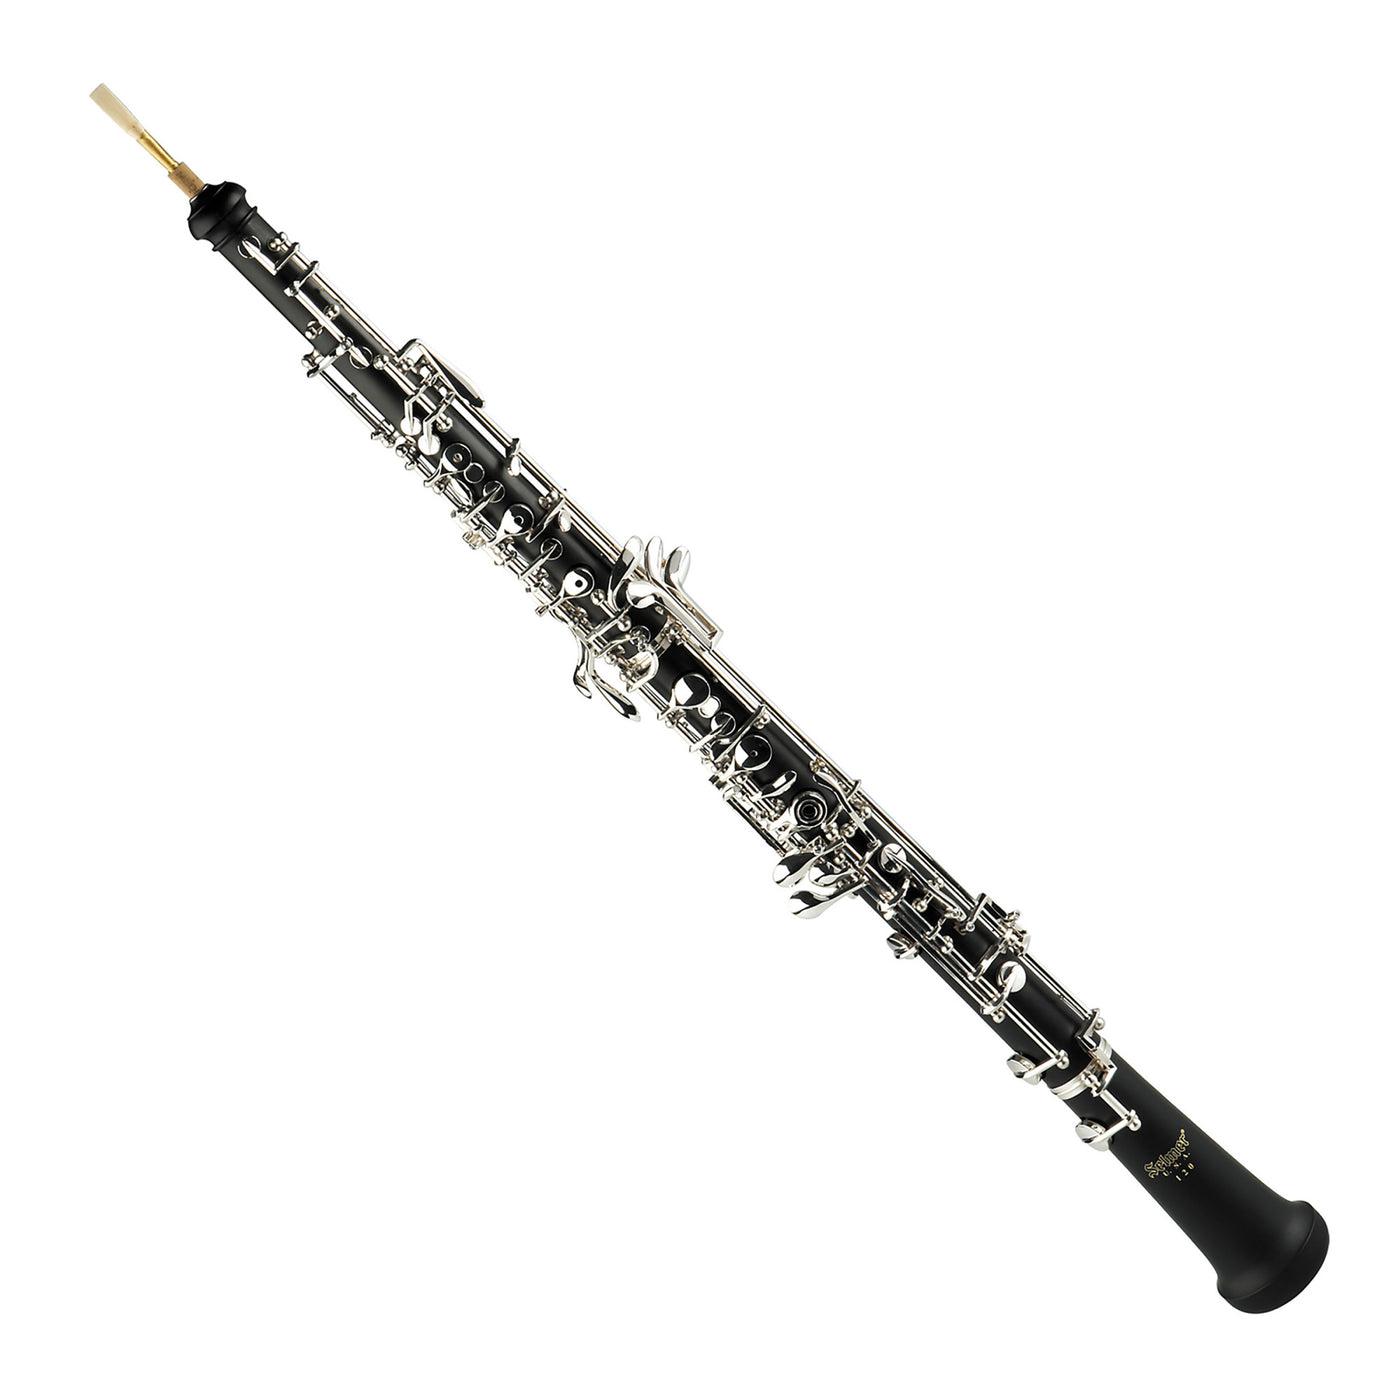 Selmer USA 120B Oboe Full Conservatory Outfit